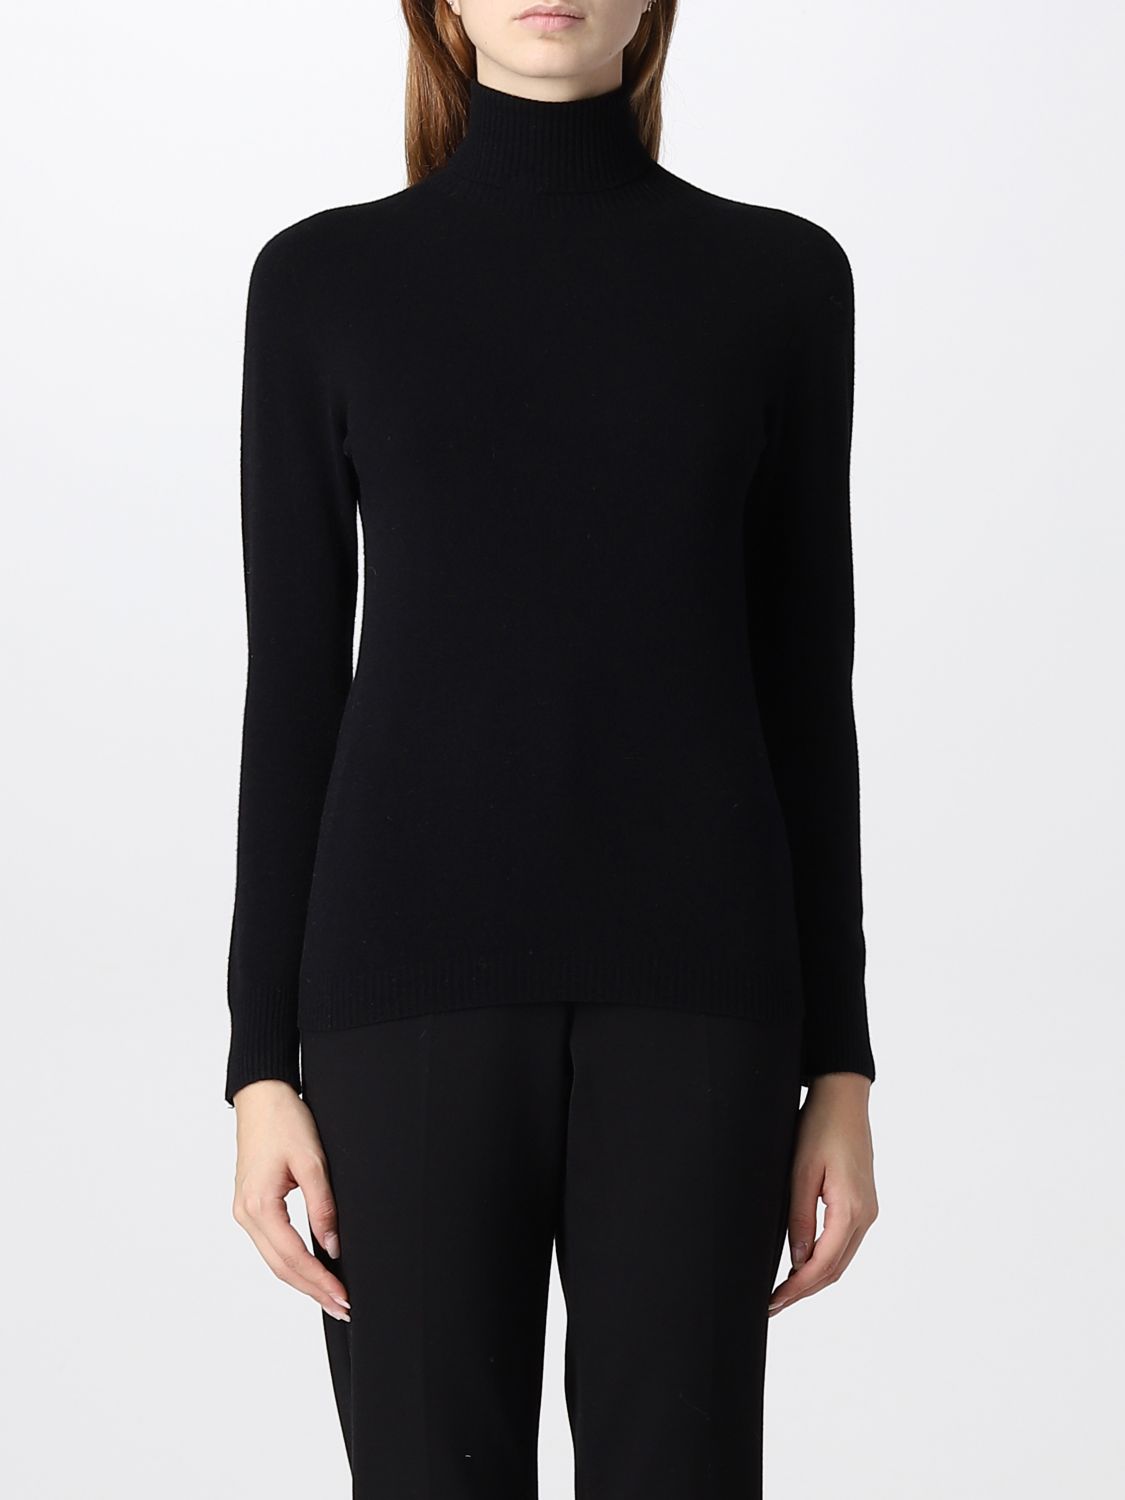 ERMANNO FIRENZE: sweater for woman - Black | Ermanno Firenze sweater ...